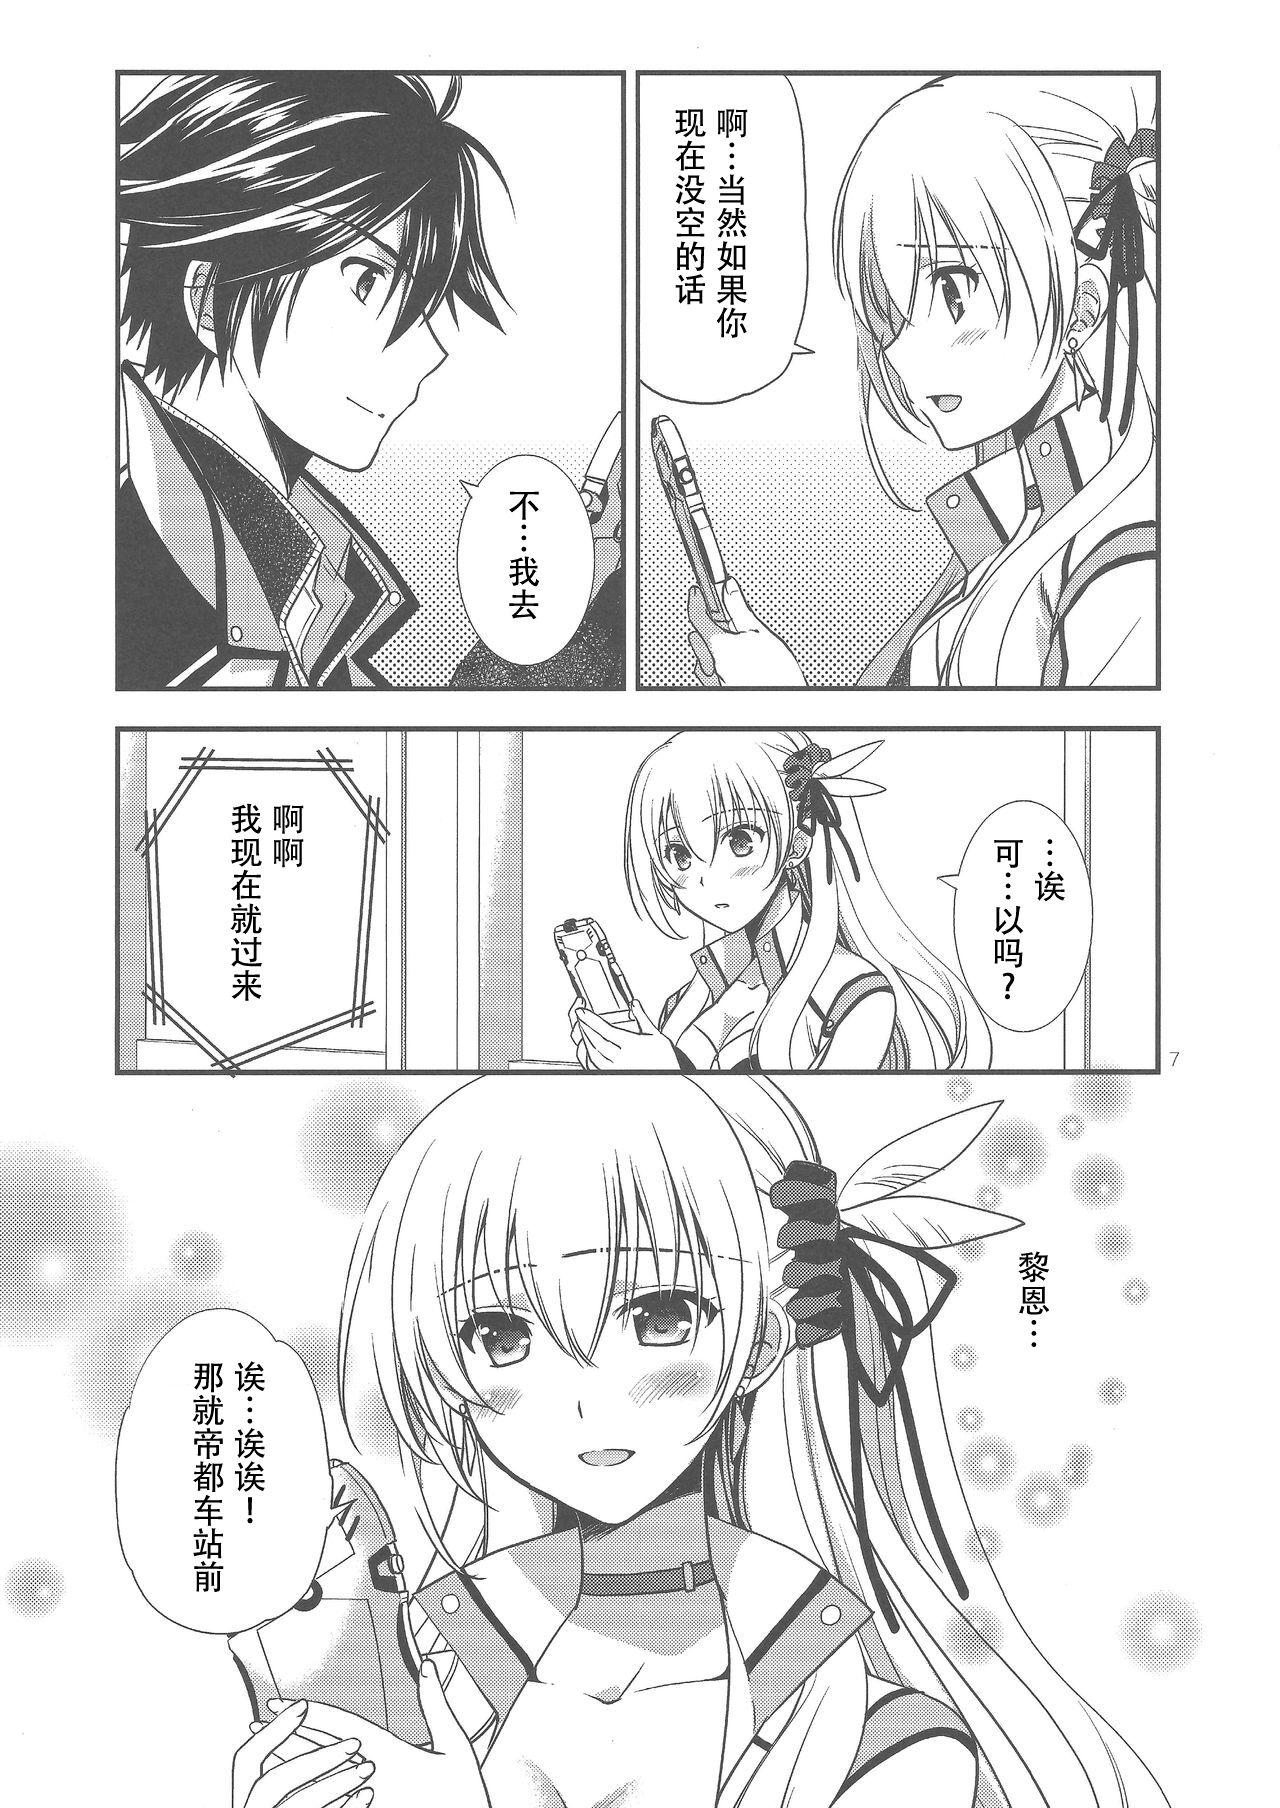 Cheating Wife Houkago Date - The legend of heroes | eiyuu densetsu Blows - Page 5